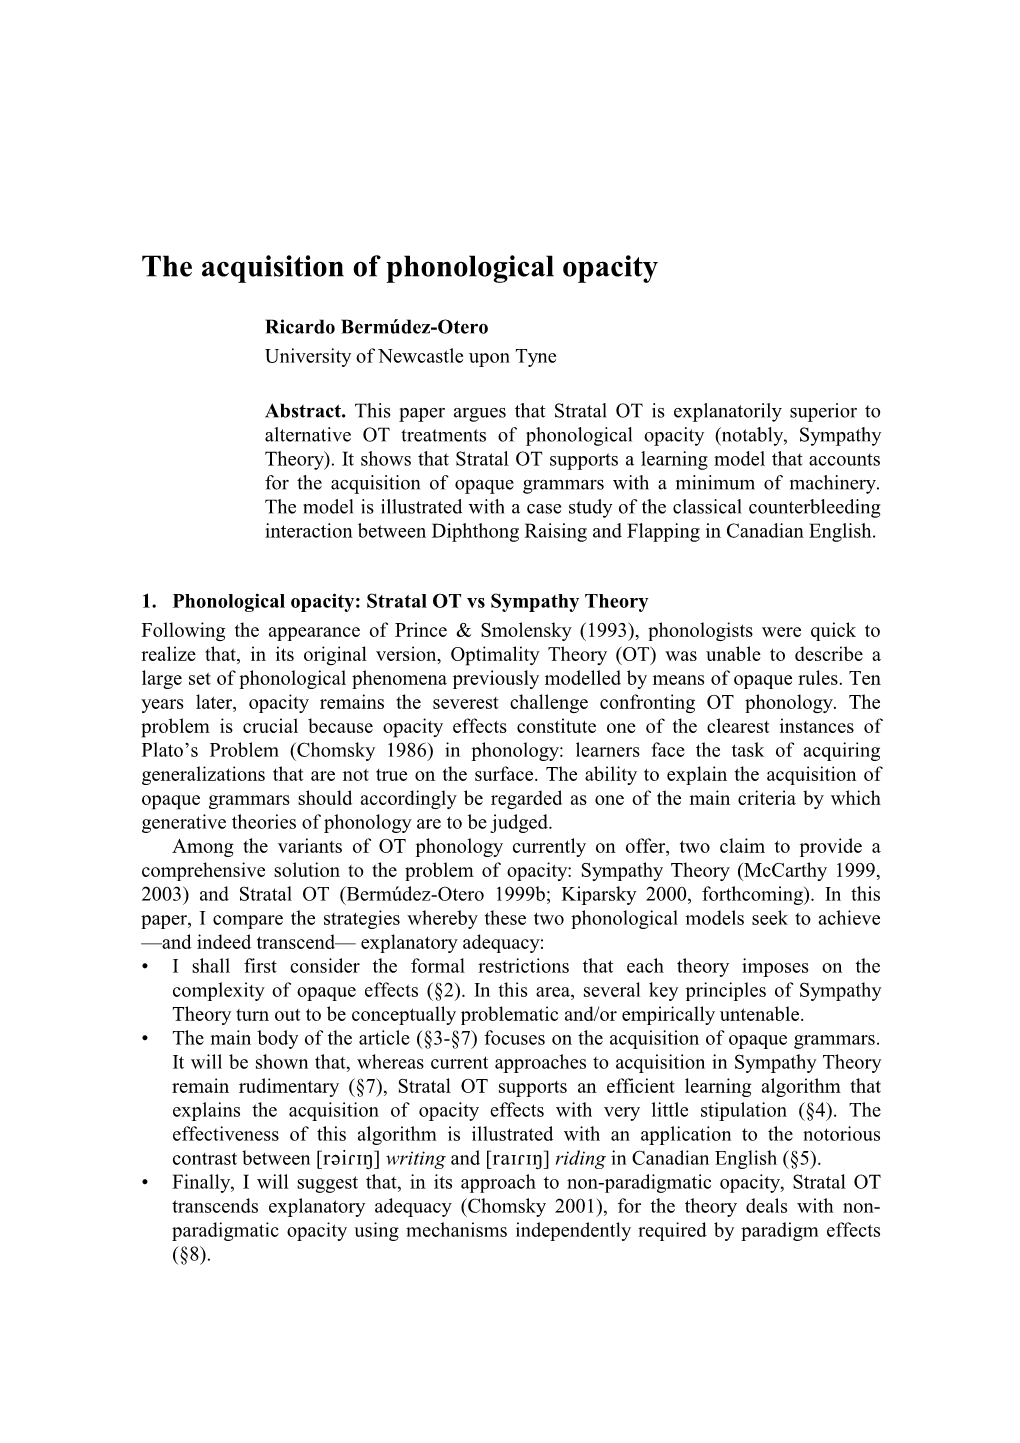 The Acquisition of Phonological Opacity